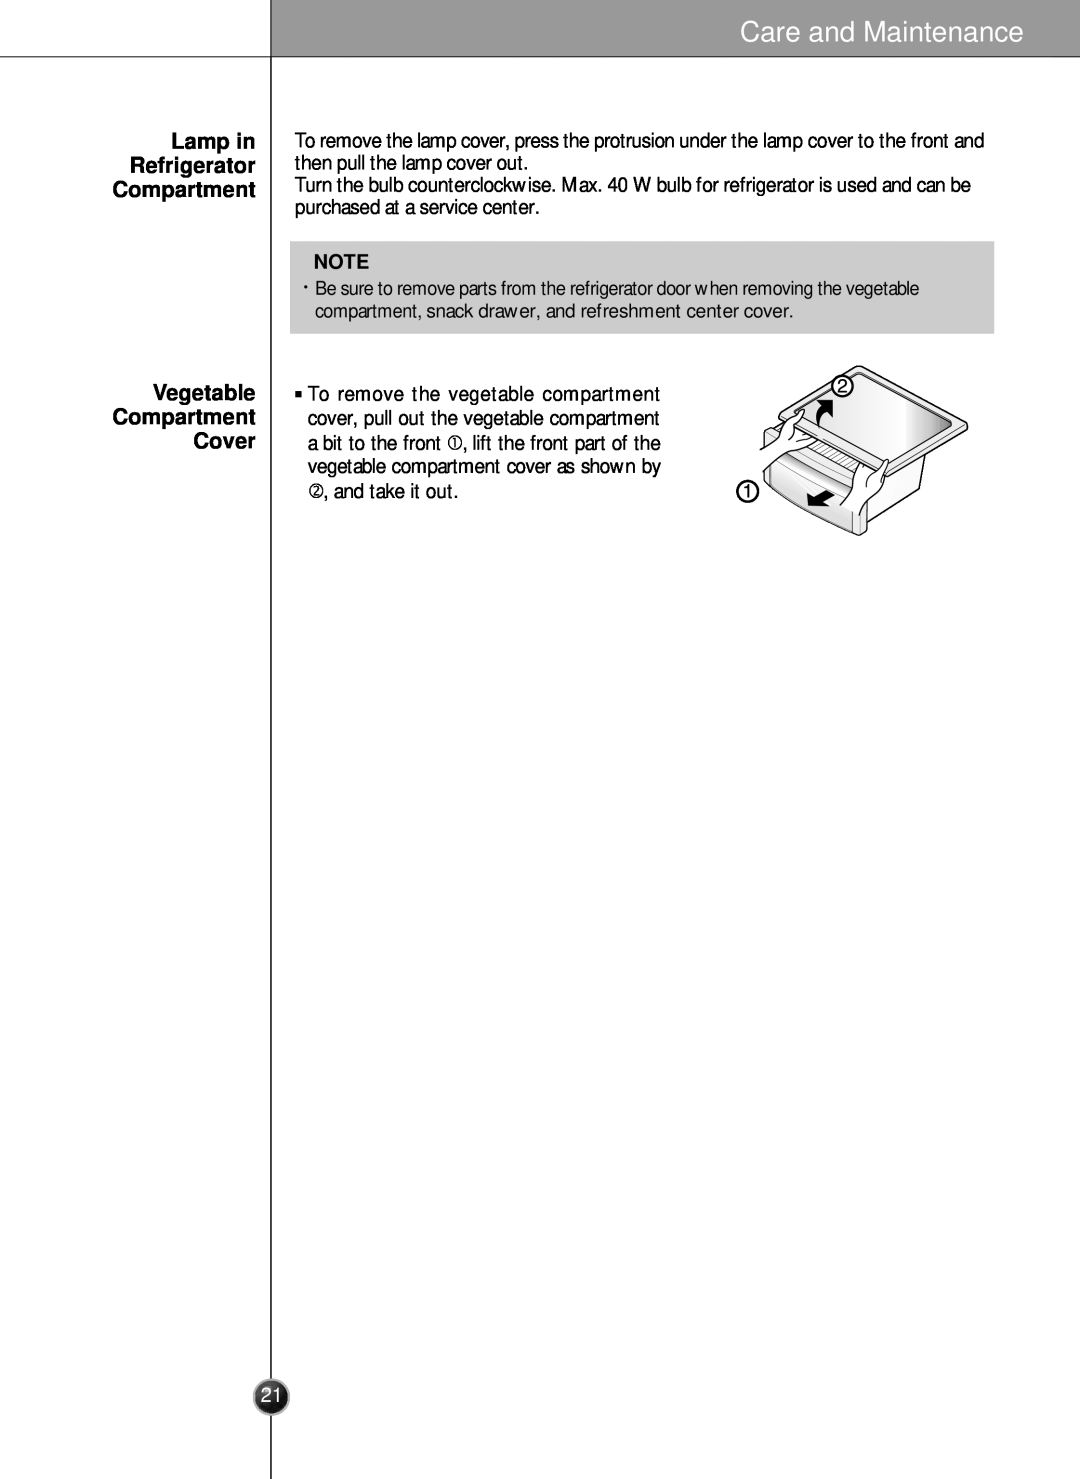 LG Electronics LSC26905 owner manual Care and Maintenance, Lamp in Refrigerator Compartment, Vegetable Compartment Cover 